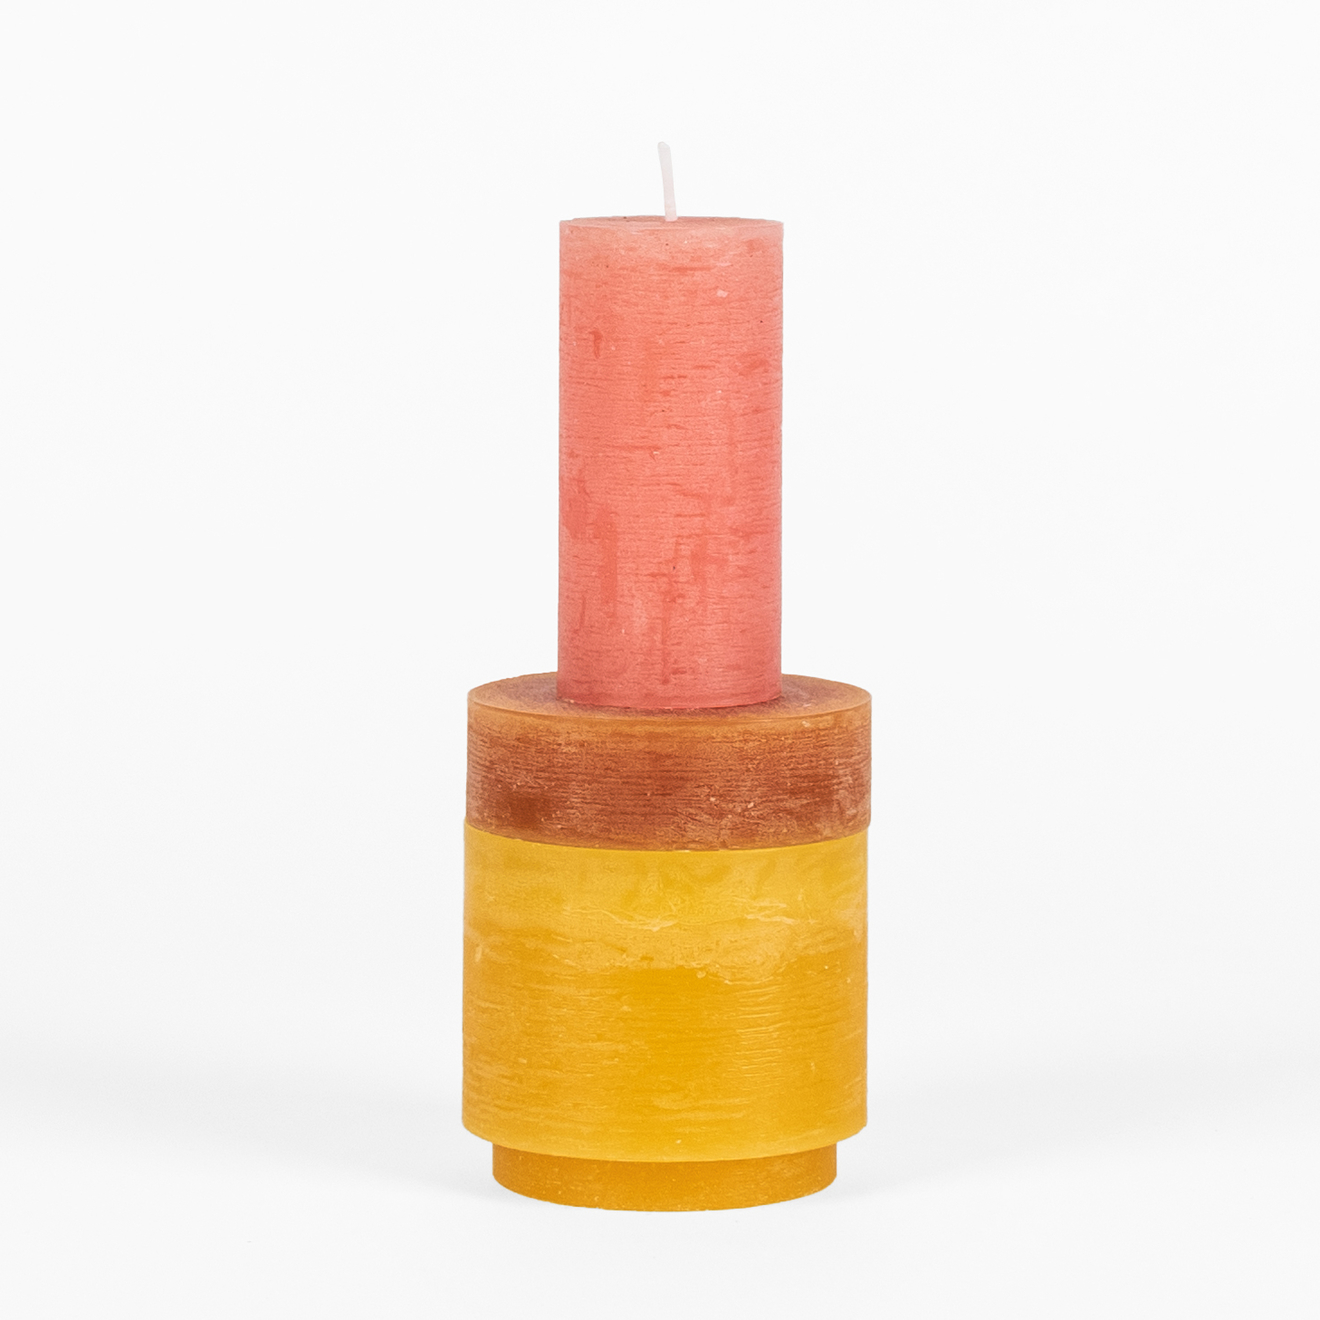 Stan Editions - Candl Stacks - Stack 02